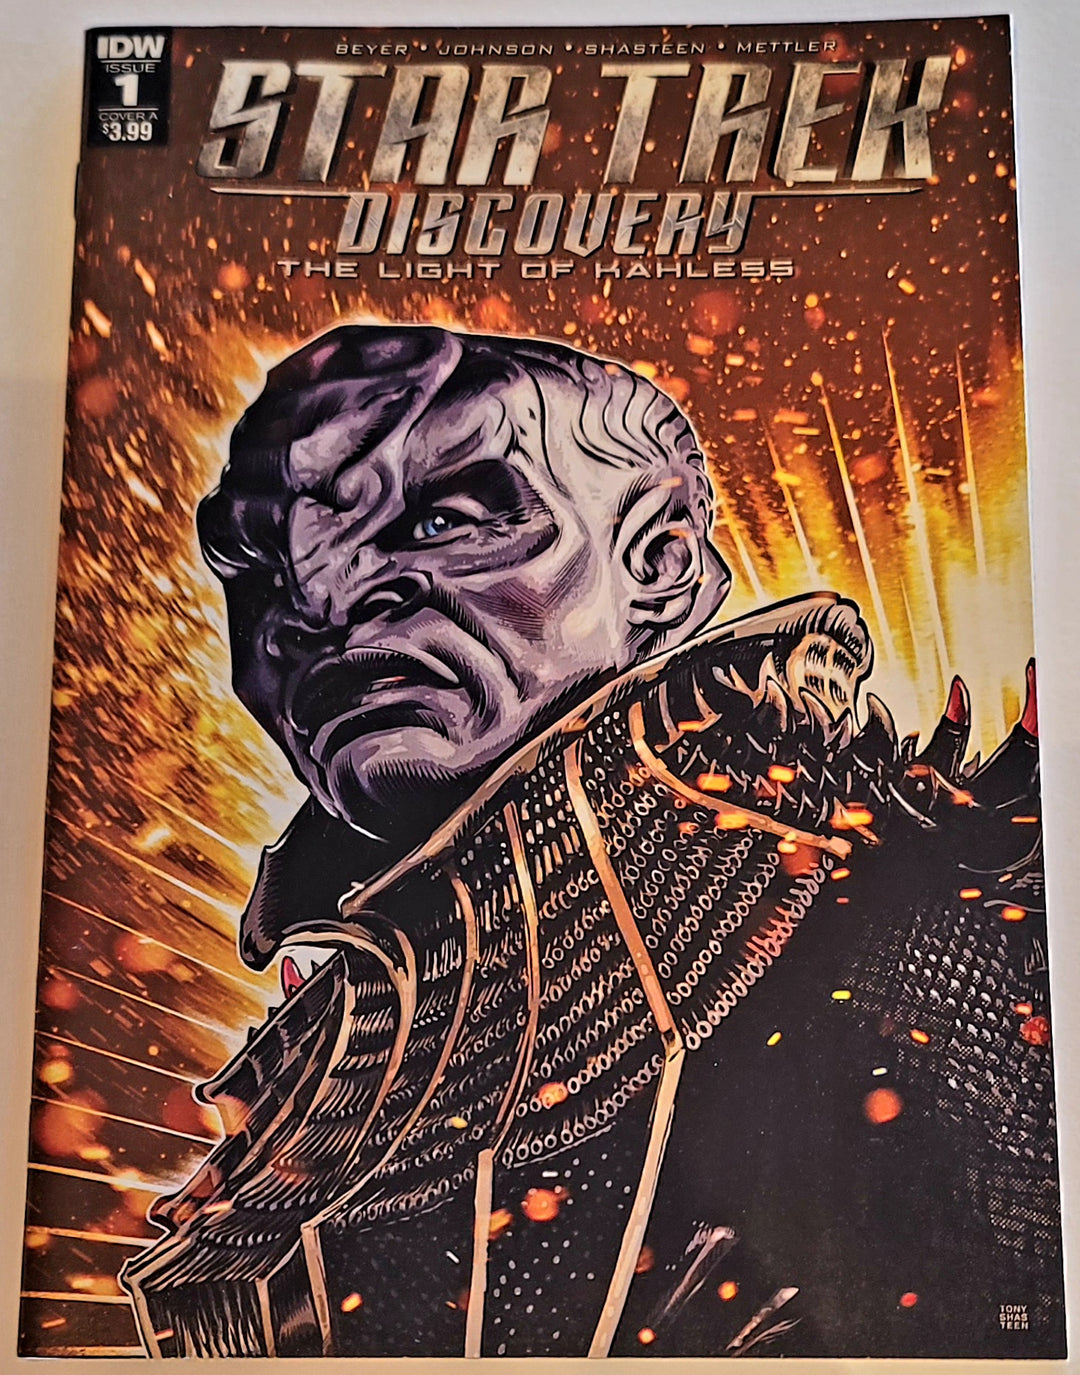 Star Trek Discovery: The Light of Kahless IDW Comic Book #1